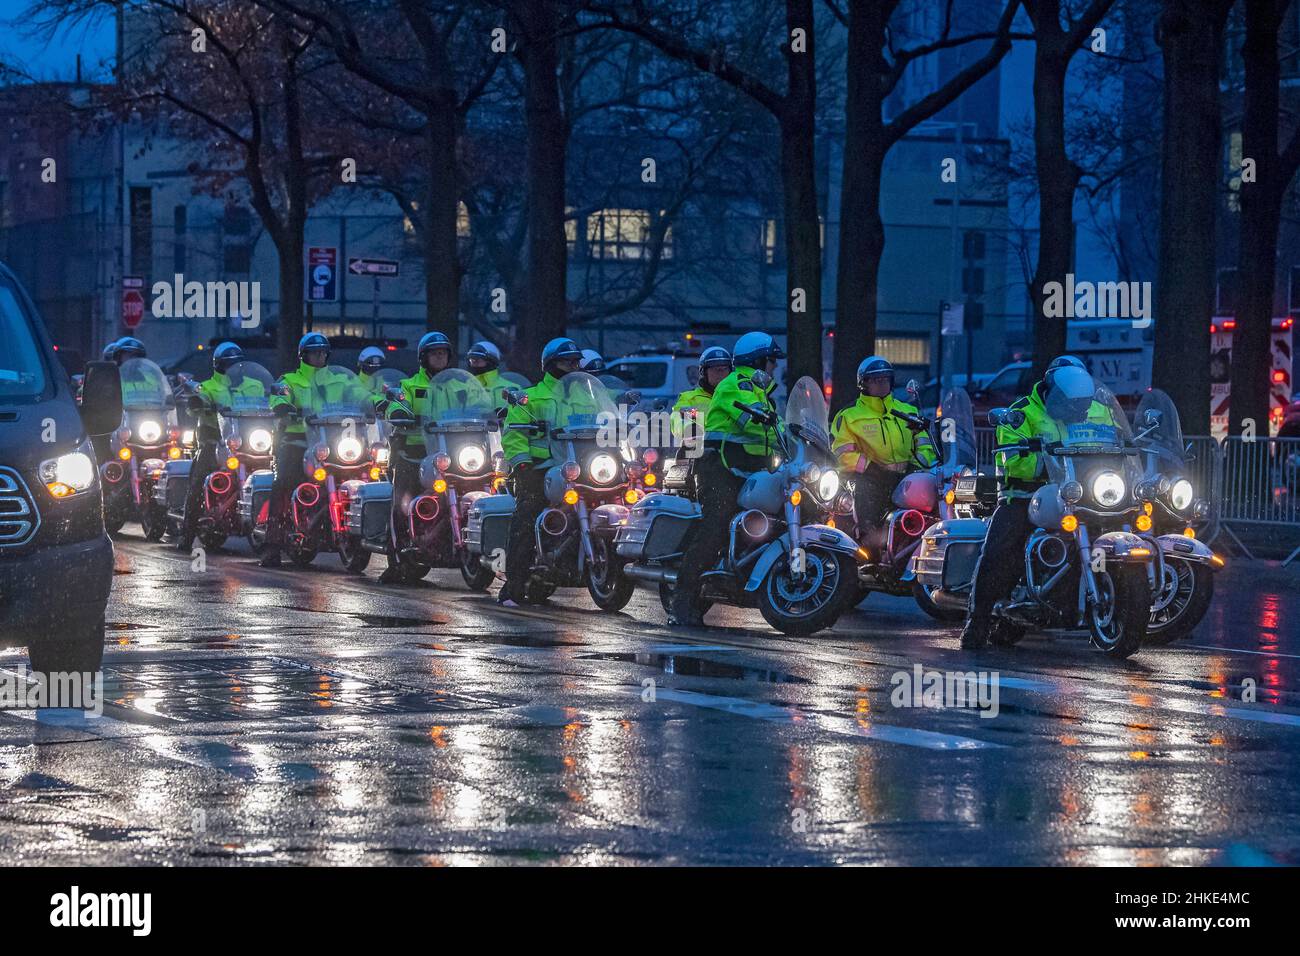 New York, United States. 03rd Feb, 2022. NEW YORK, NEW YORK - FEBRUARY 03: NYPD Highway Patrol get ready to depart with President Biden's motorcade from Long Island City on February 3, 2022 in Queens Borough of New York City. U.S. President Joe Biden visits New York public school P.S. 111 Jacob Blackwell to discuss community violence intervention programs with local leaders in Queens. Credit: Ron Adar/Alamy Live News Stock Photo